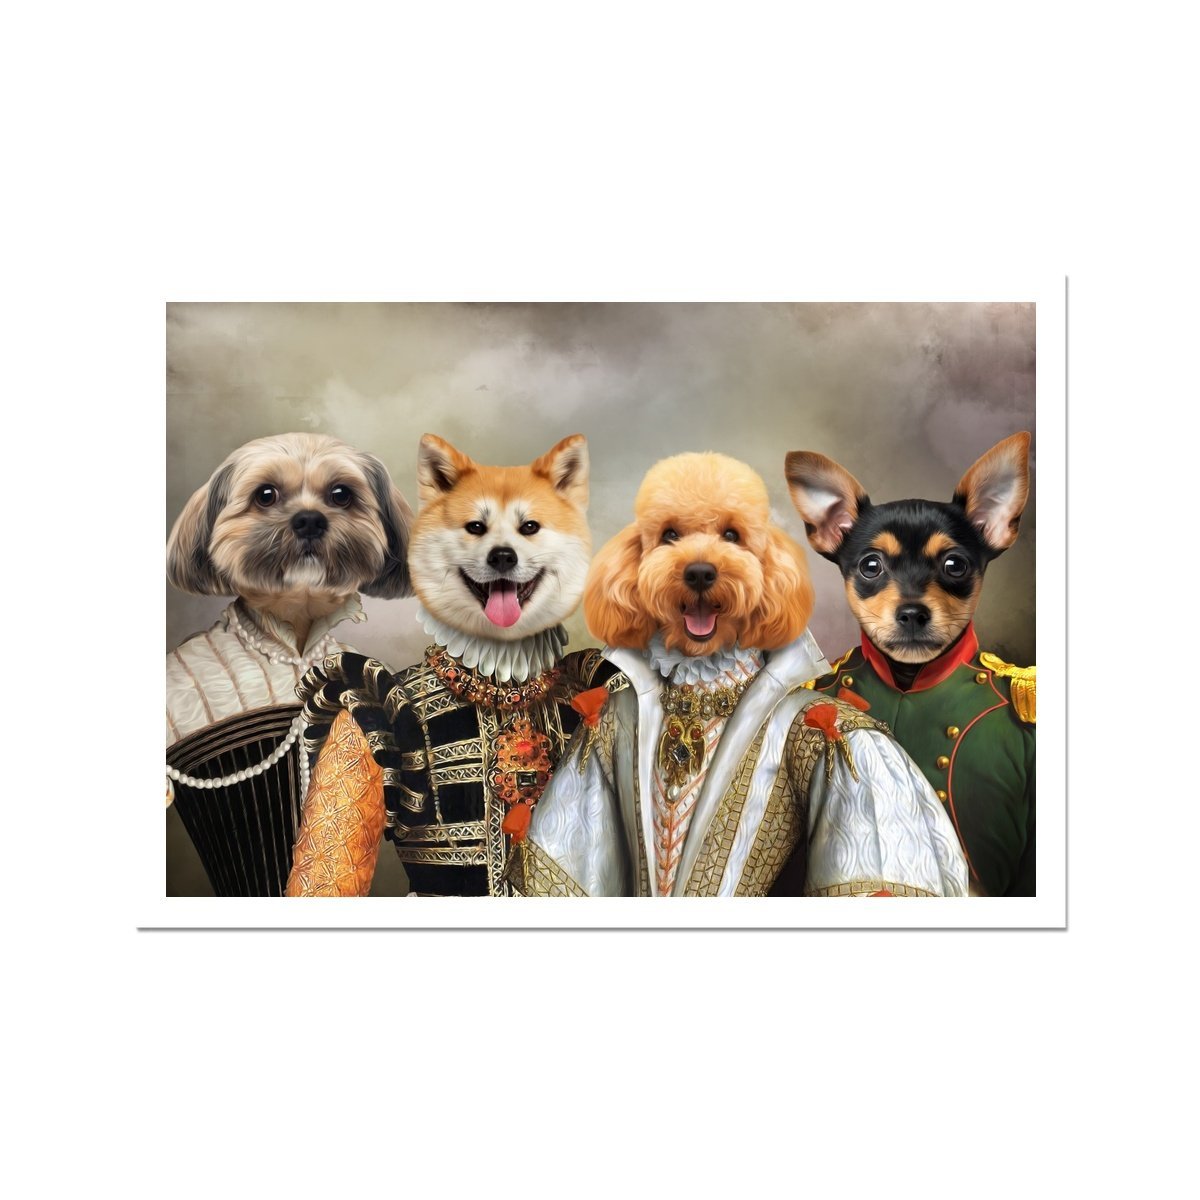 The Dignified 4: Custom Pet Poster - Paw & Glory - #pet portraits# - #dog portraits# - #pet portraits uk#Paw & Glory, paw and glory, dog admiral portrait dog paintings custom pet photo into painting fancy pet pictures custom dog print canvas dog pet portraits